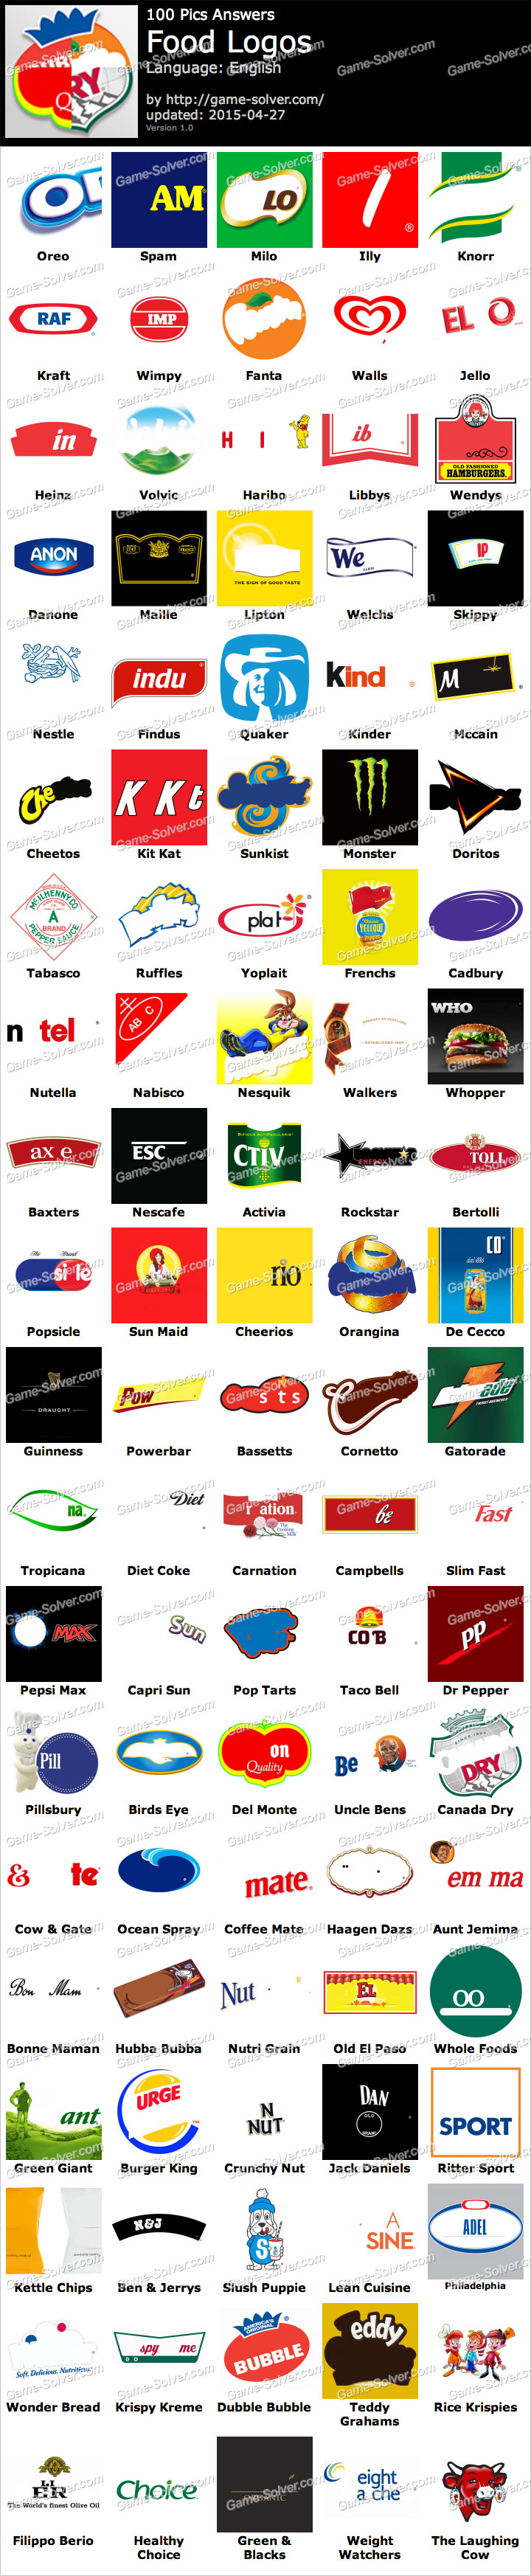 guess the brand answers food